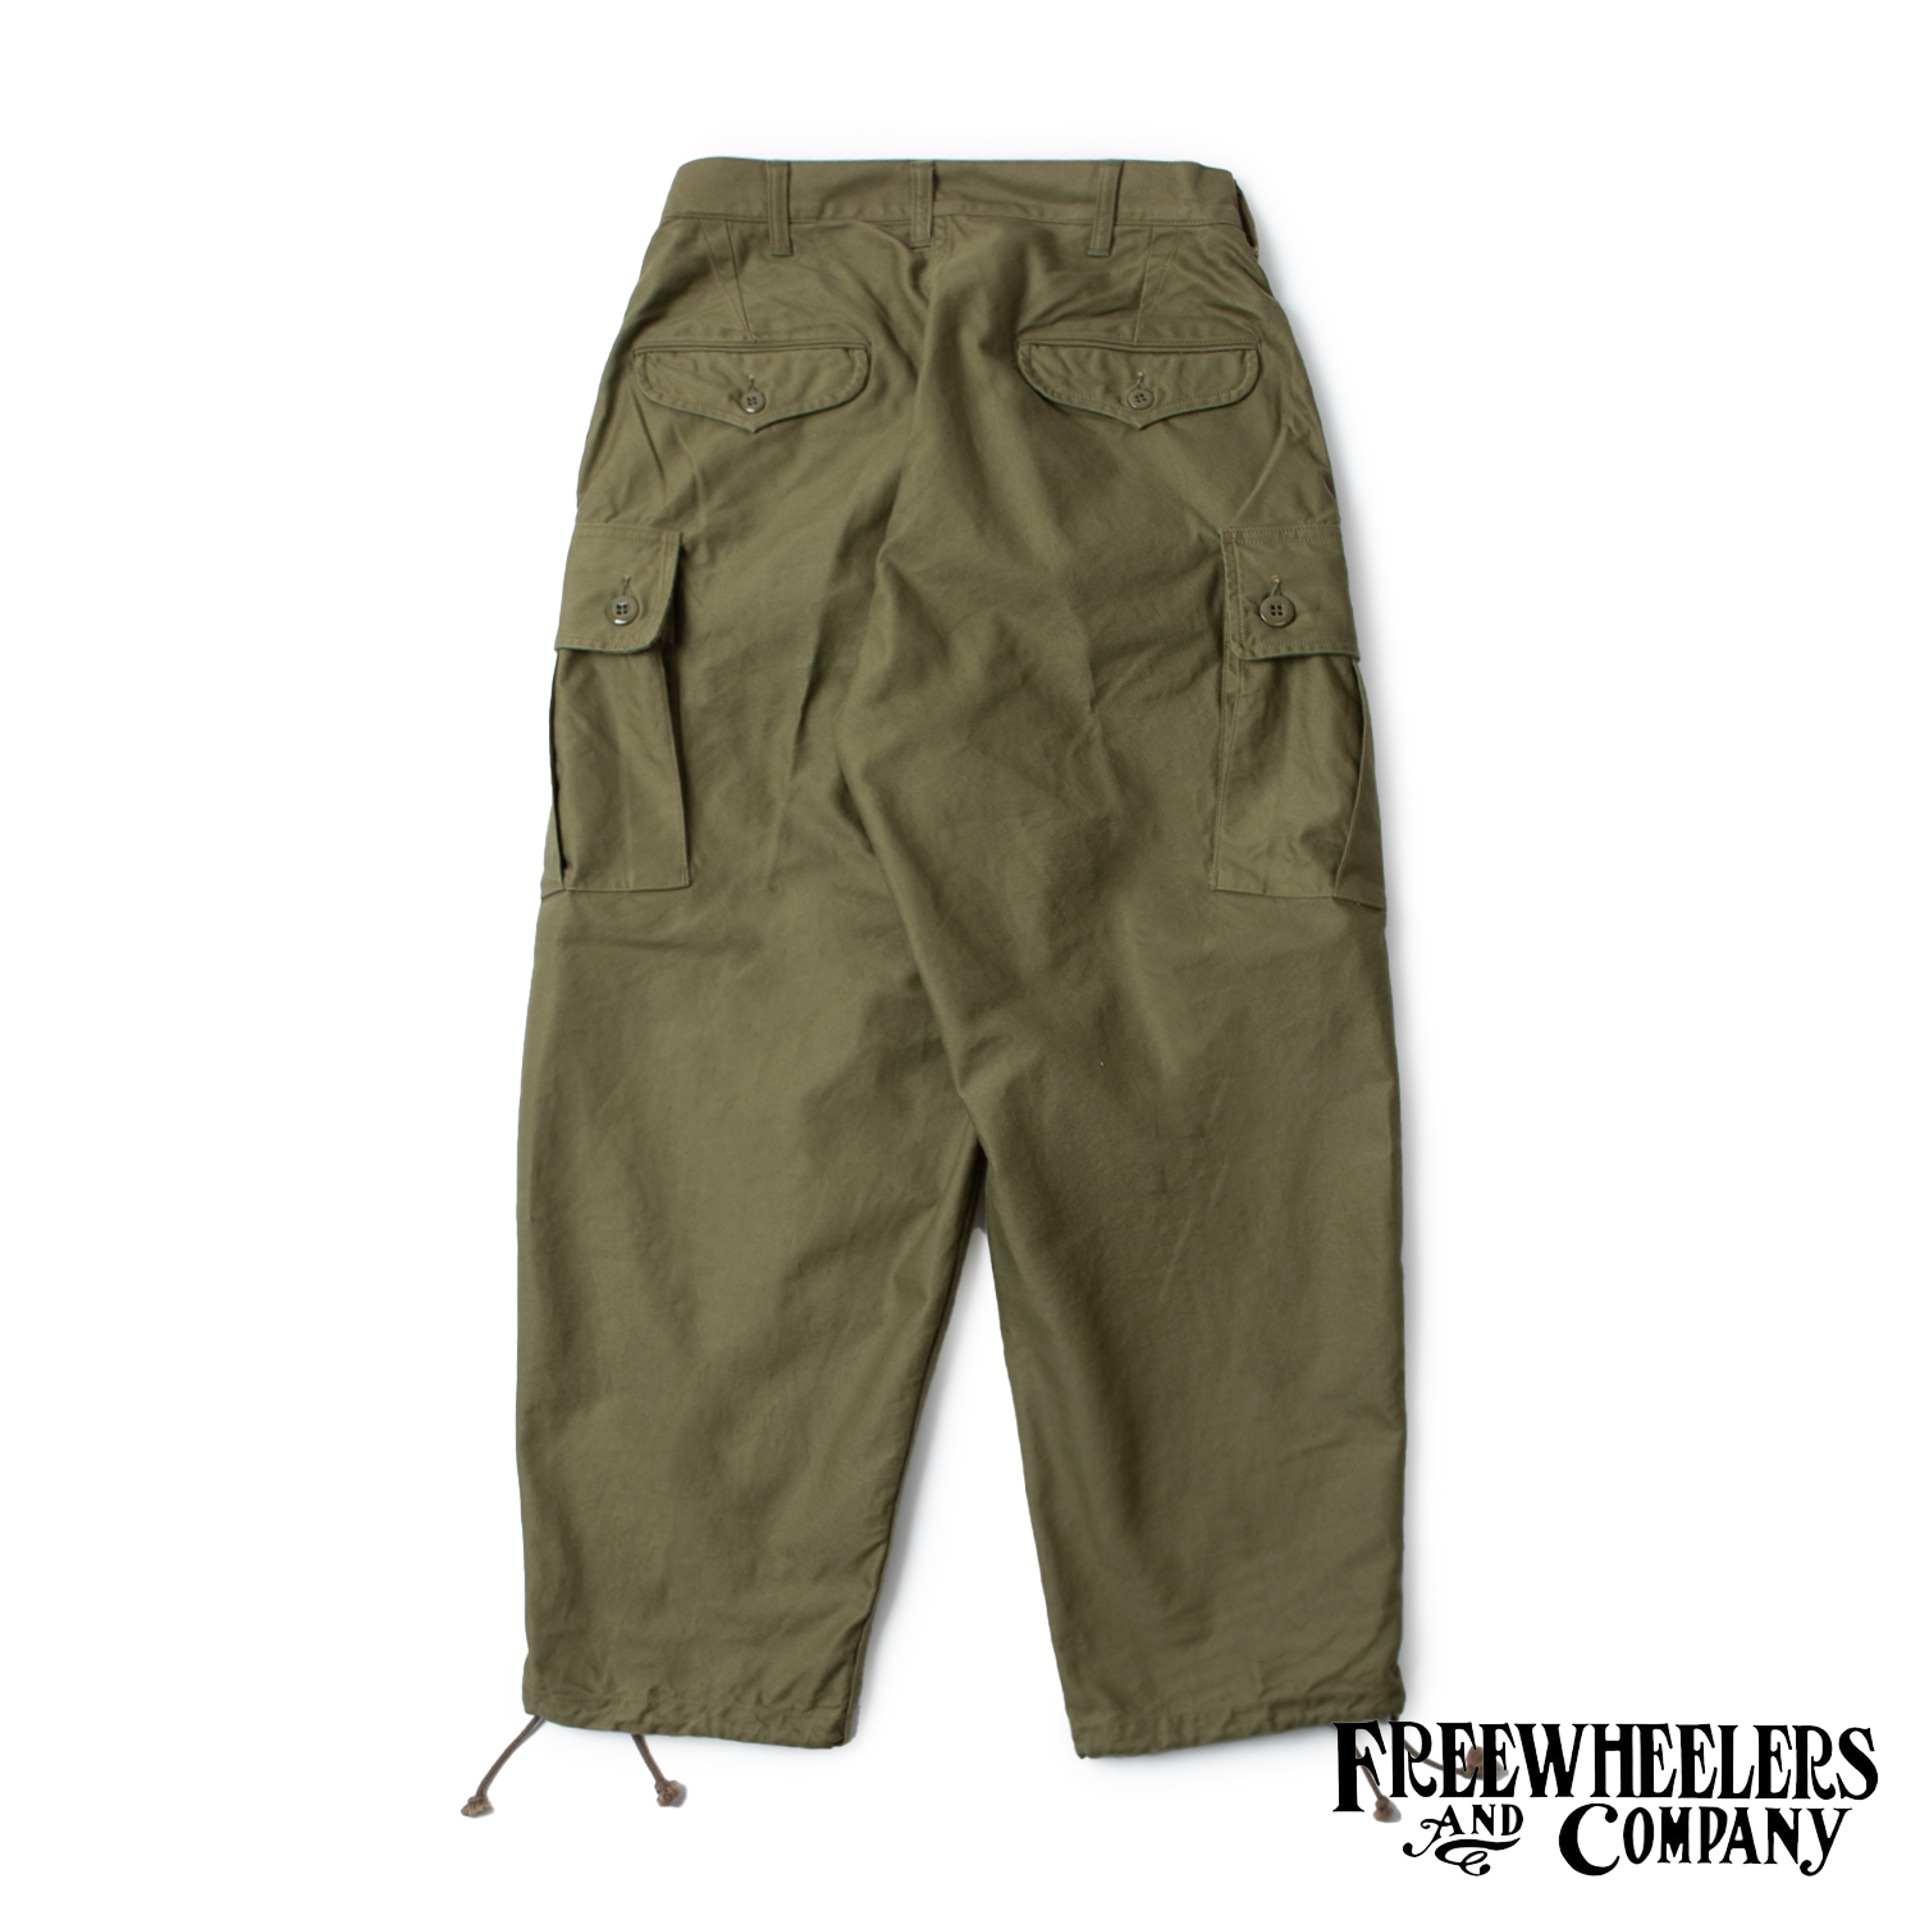  [UNION SPECIAL OVERALLS]   Military Tropical Trousers  “JUNGLE FATIGUES”  (Olive)  (5/3 Open)